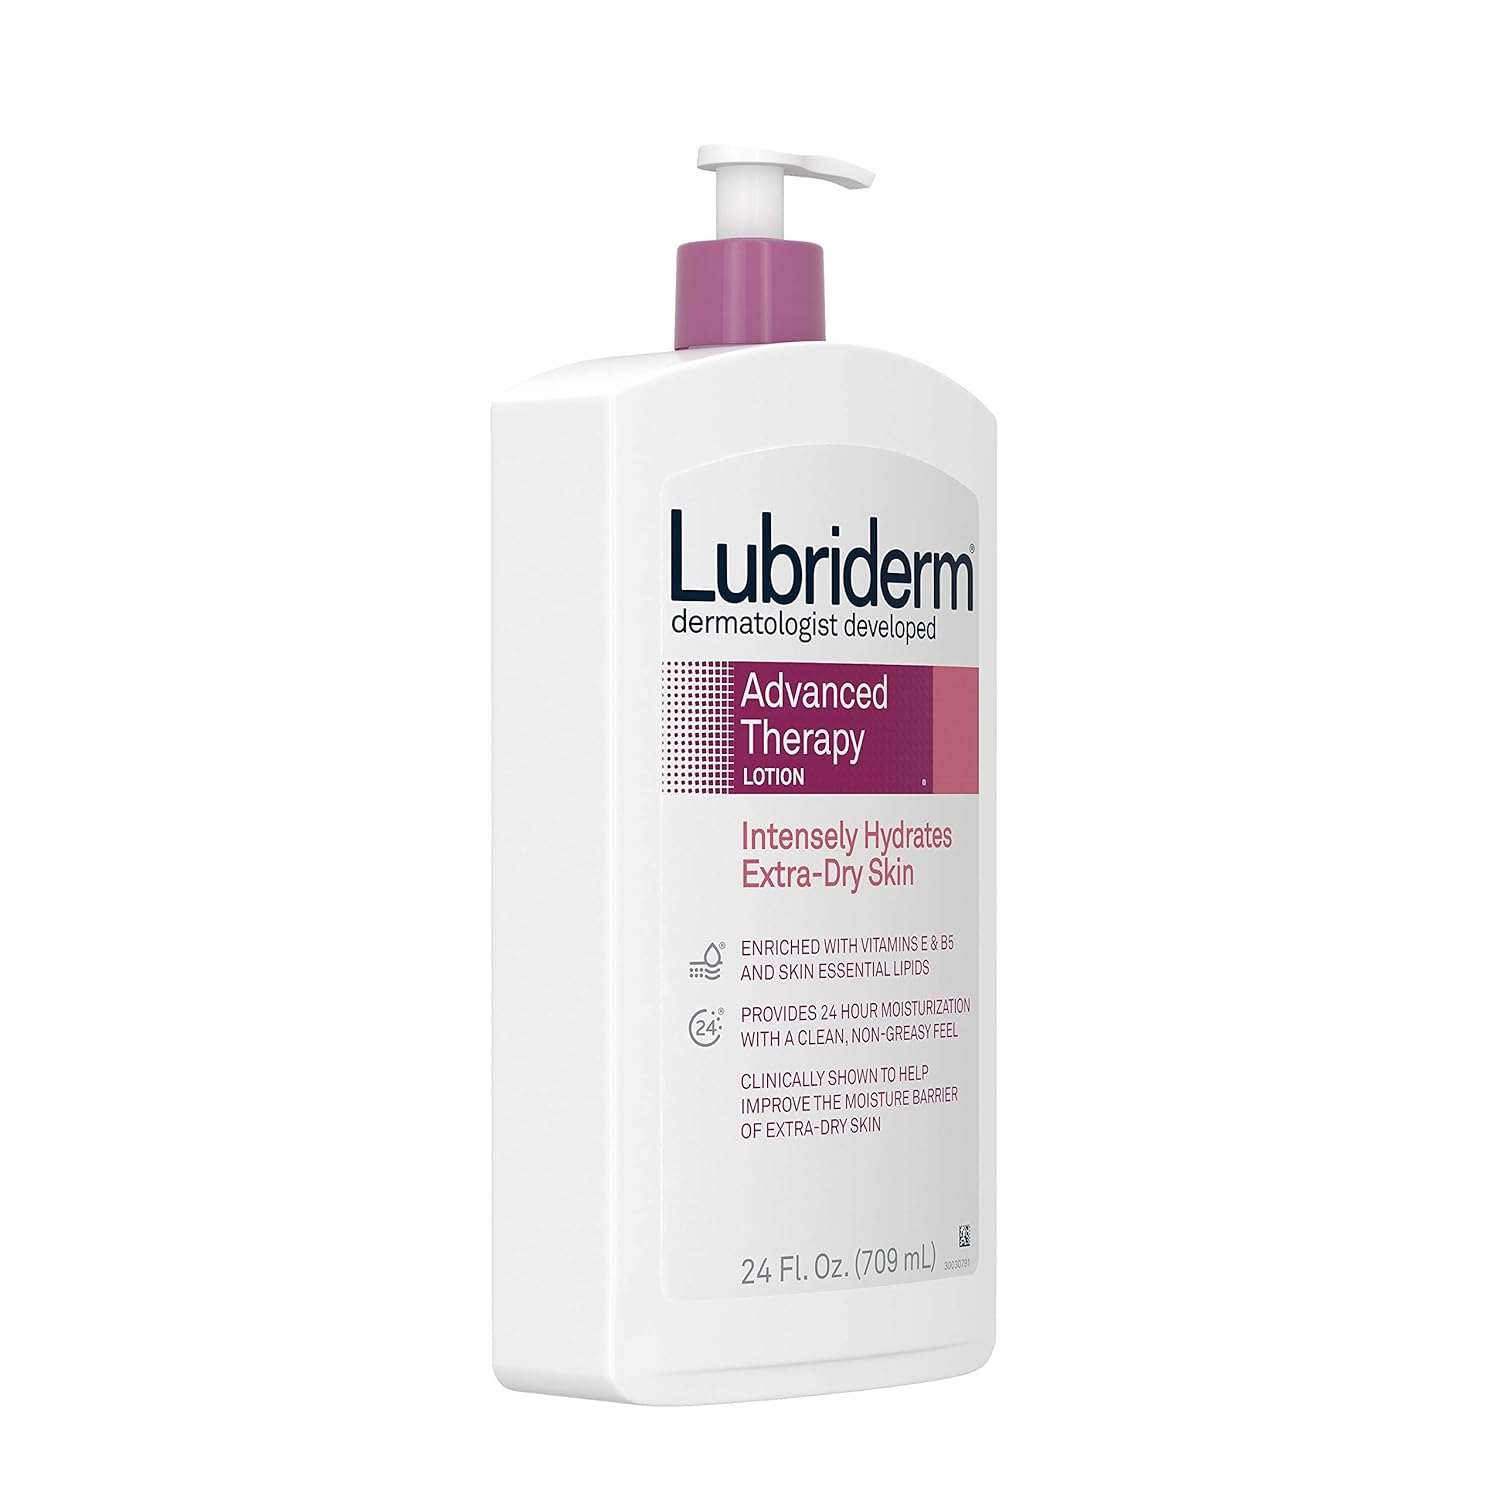 Lubriderm Advanced Therapy Fragrance-Free Moisturizing Lotion with Vitamins E and Pro-Vitamin B5, Intense Hydration for Extra Dry Skin, Non-Greasy Formula, Pack of Three, 3 x 24 fl. oz : Beauty & Personal Care